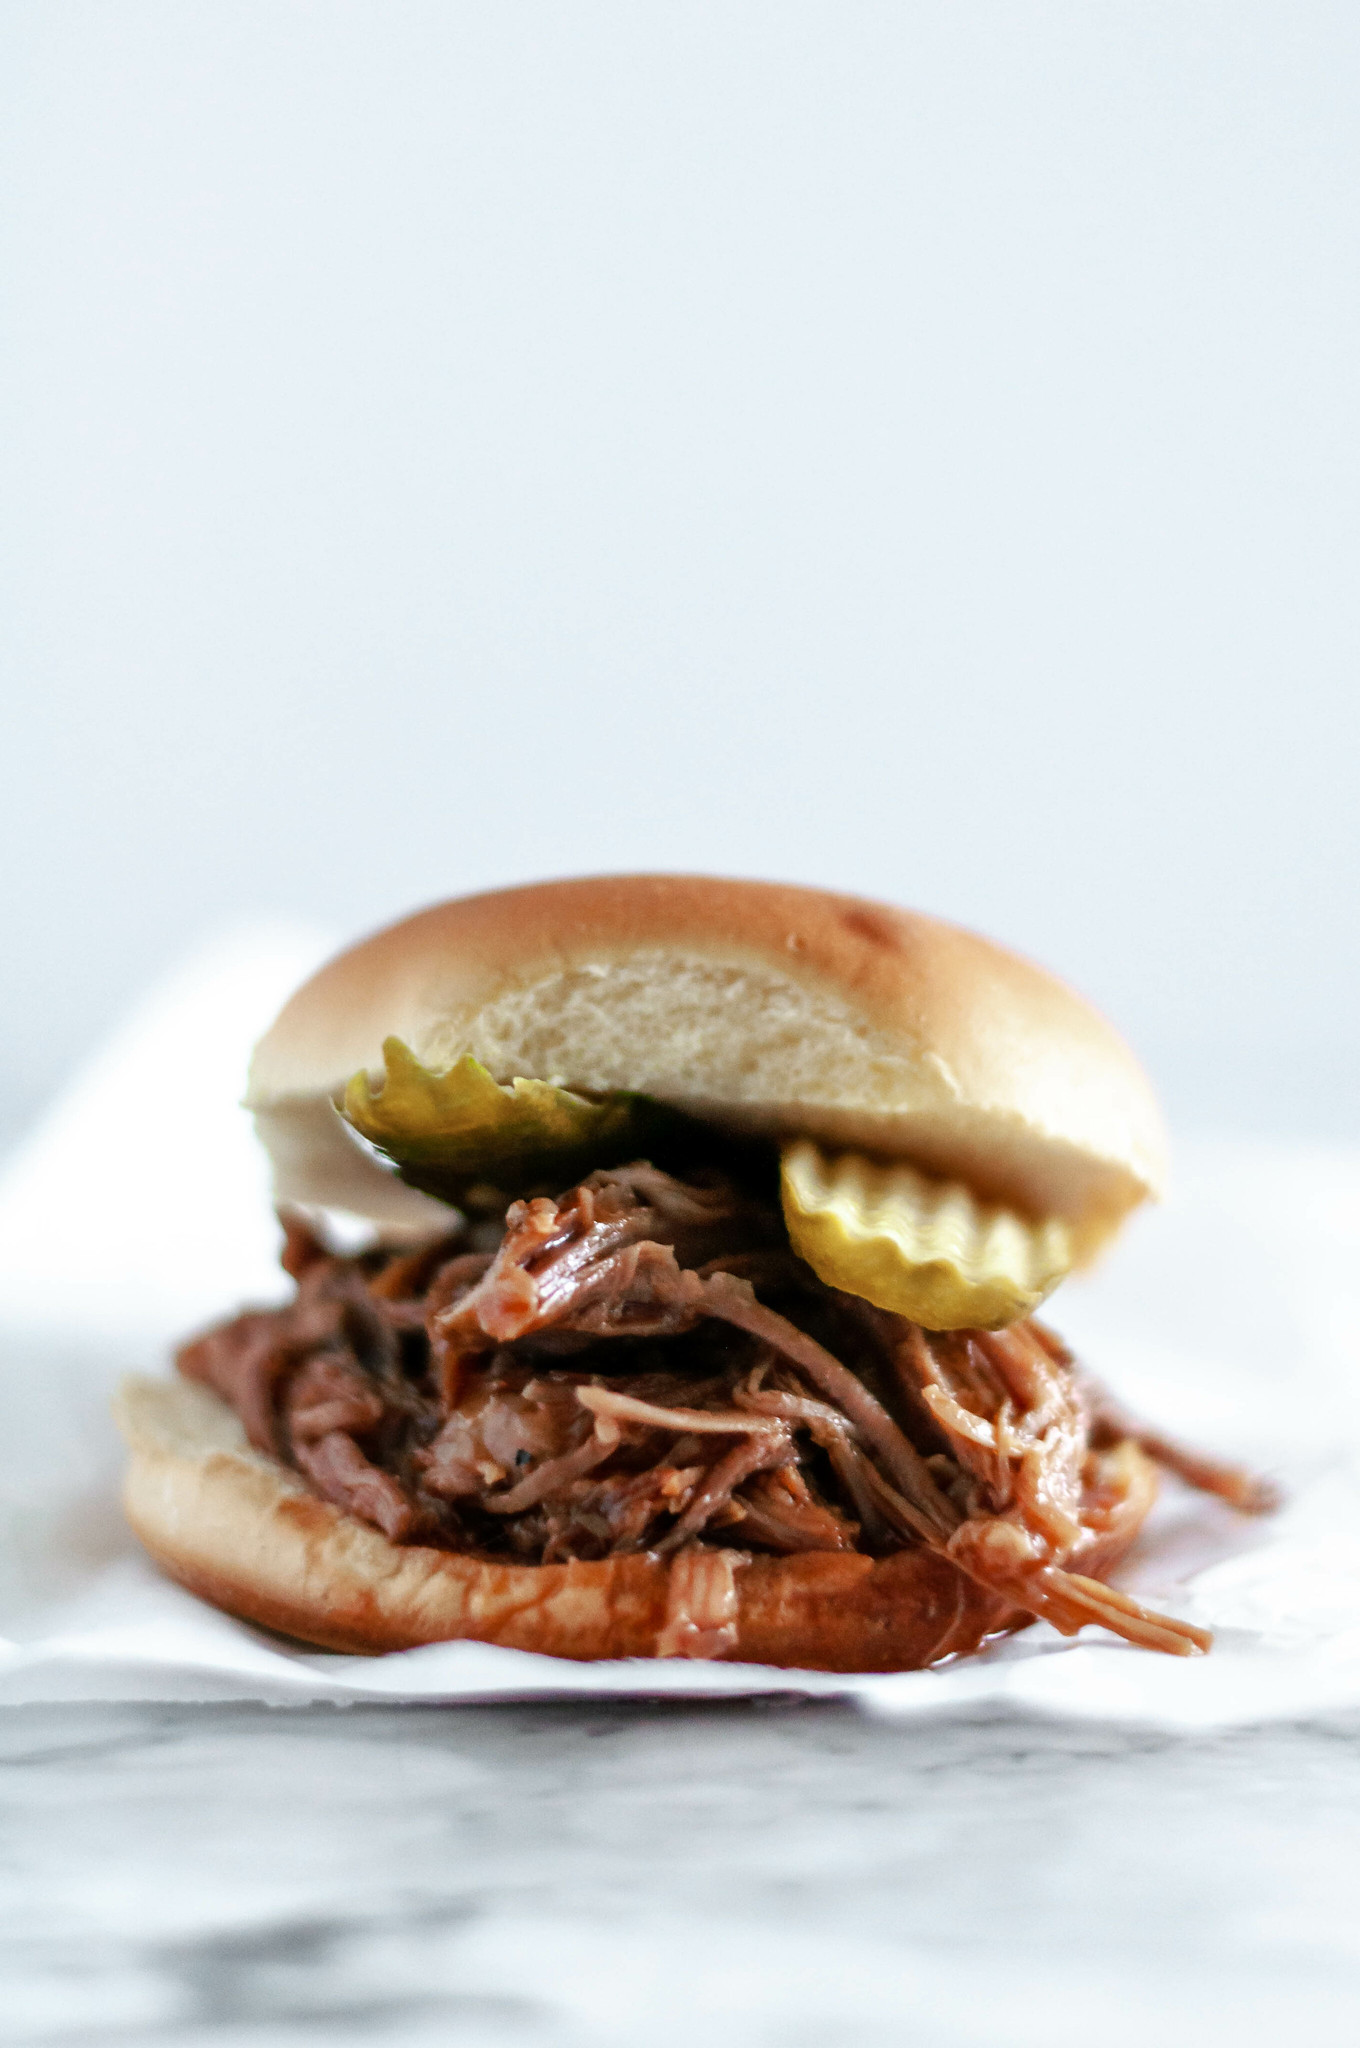 Rootbeer BBQ Pulled Pork Sandwiches are super simple to make in the slow cooker. Four ingredients & hours in the slow cooker to tender, saucy perfection.